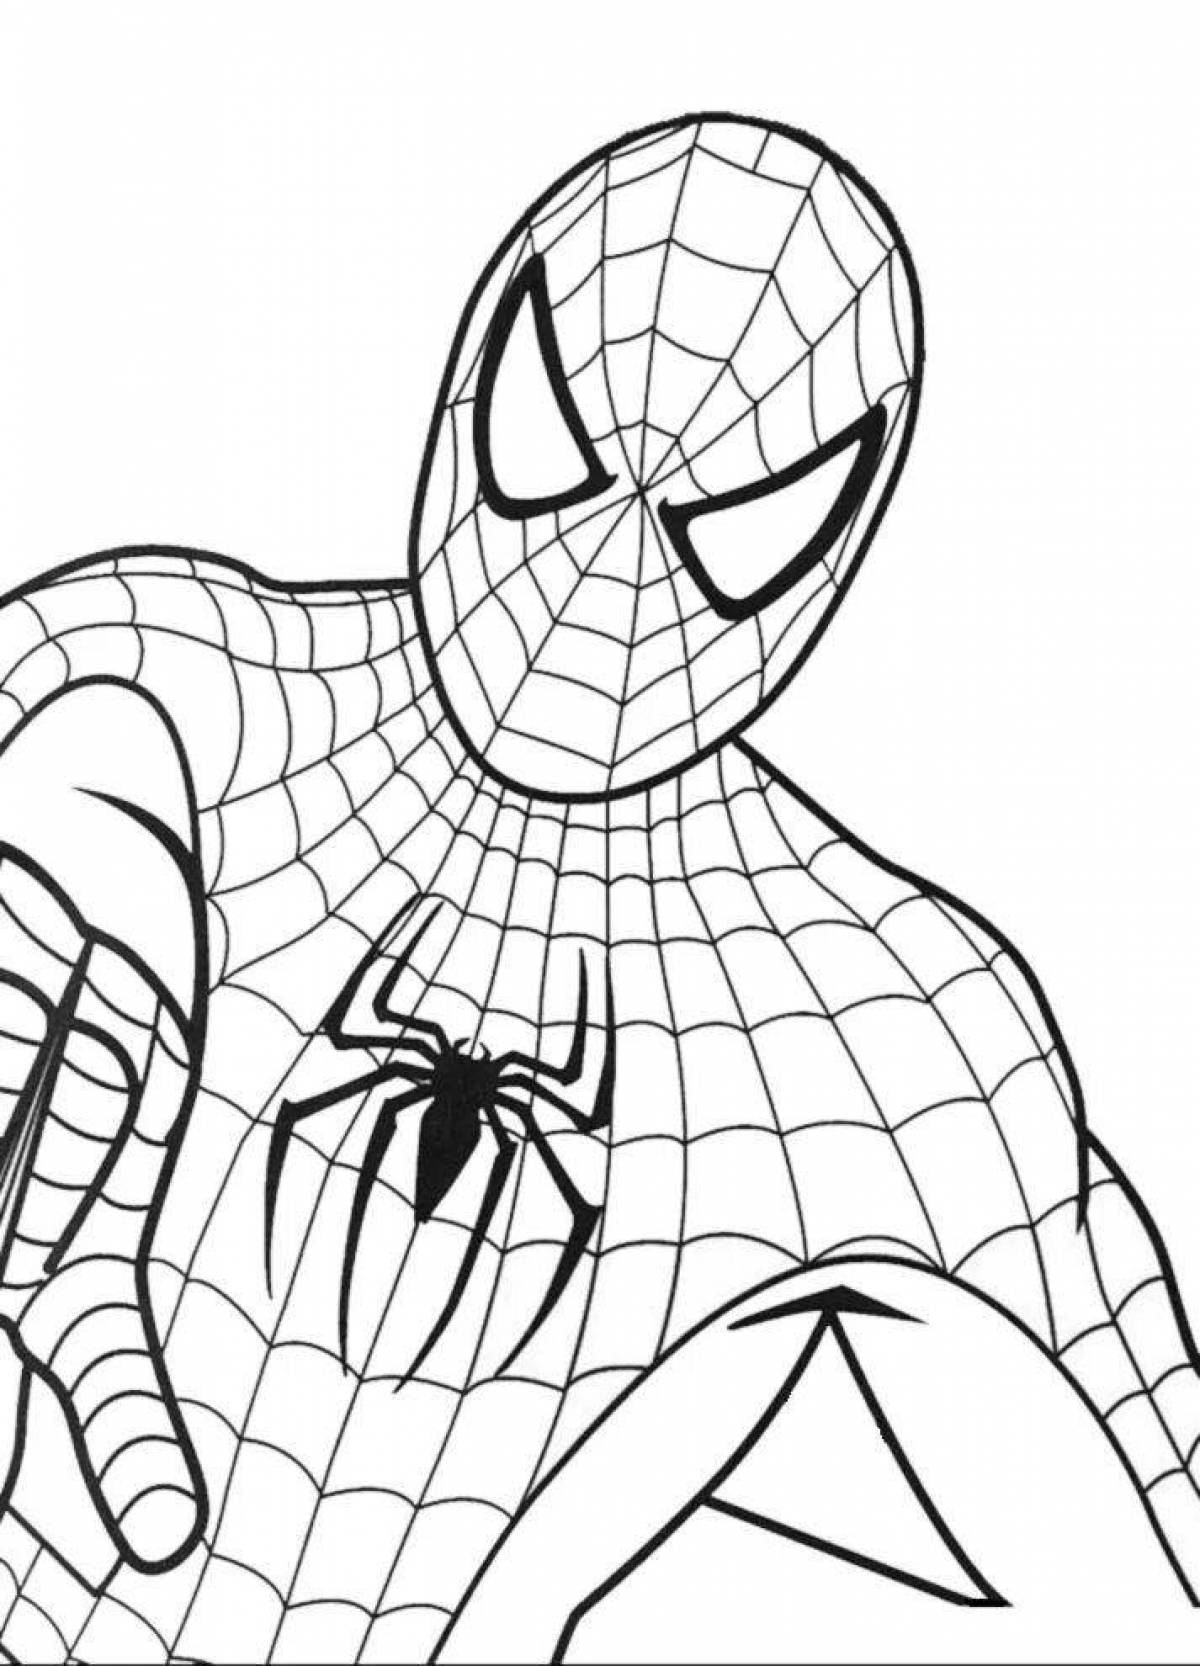 Majestic drawing of Spiderman